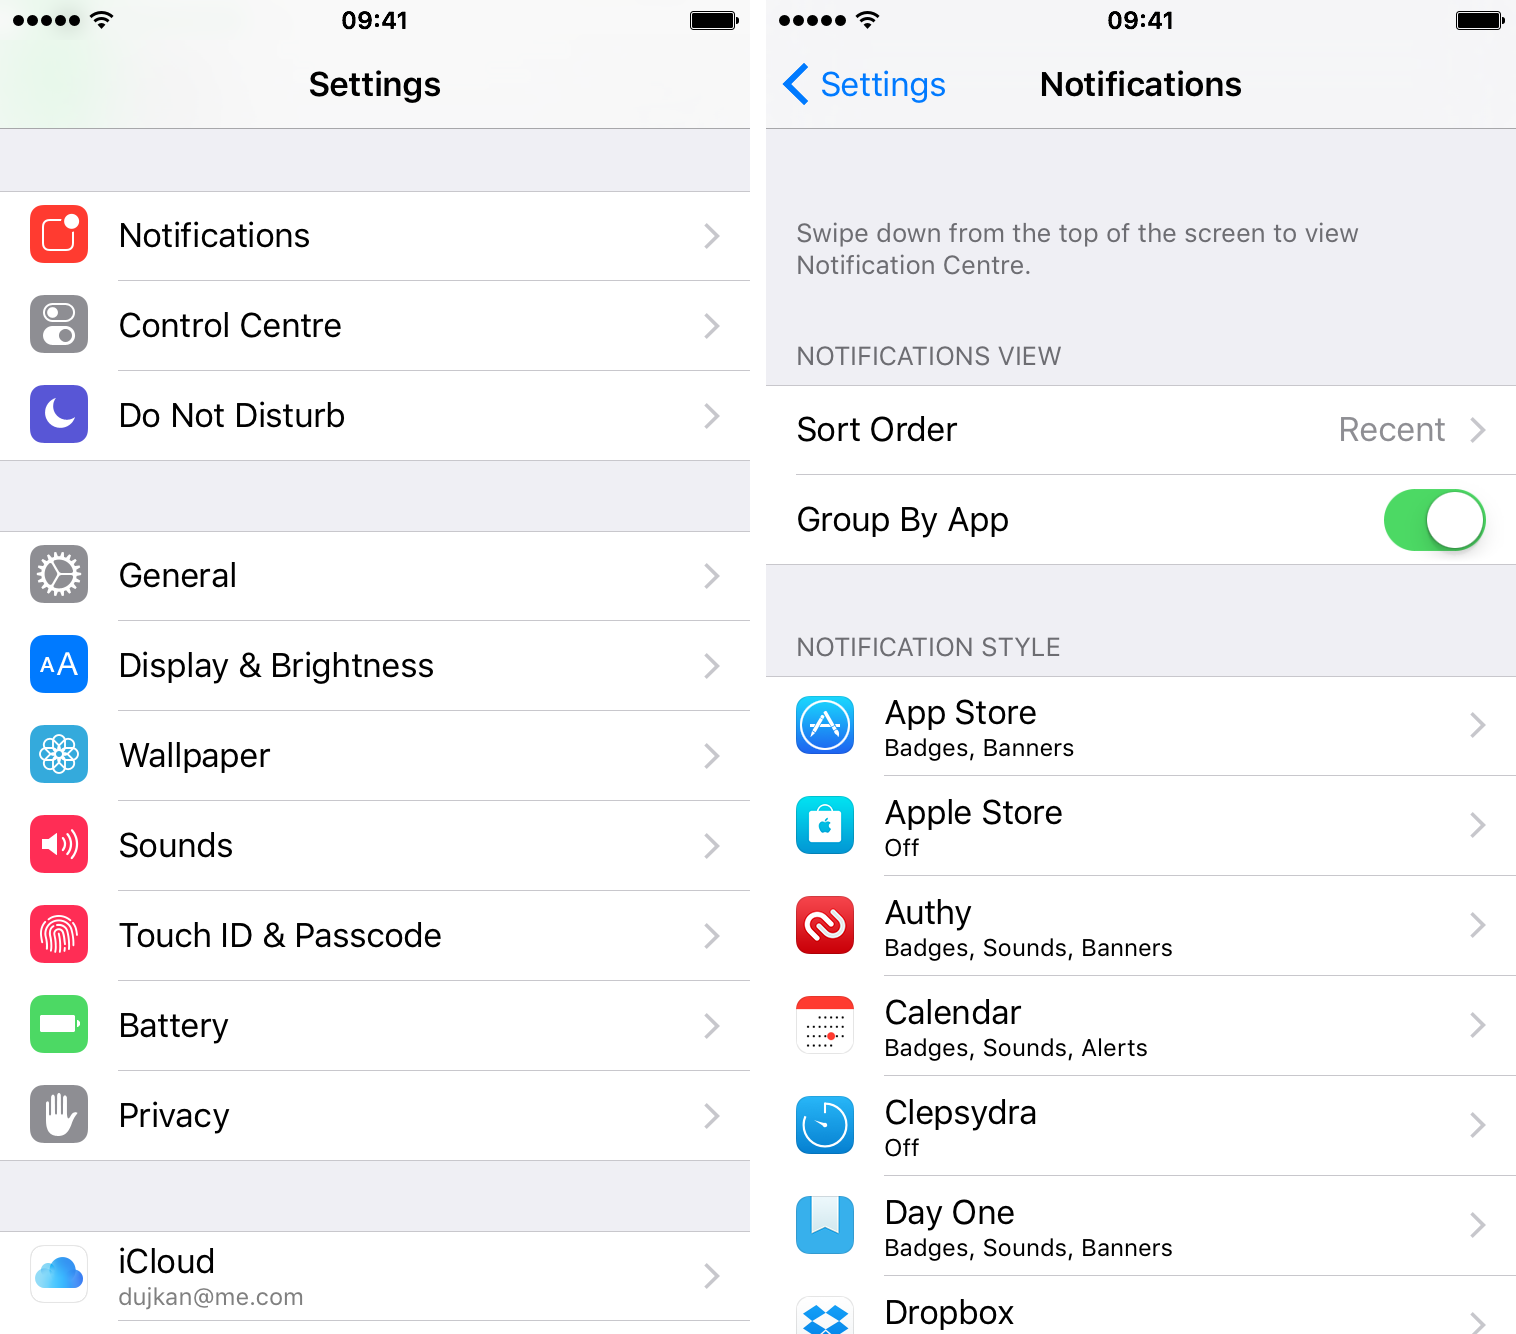 How to sort iOS notifications